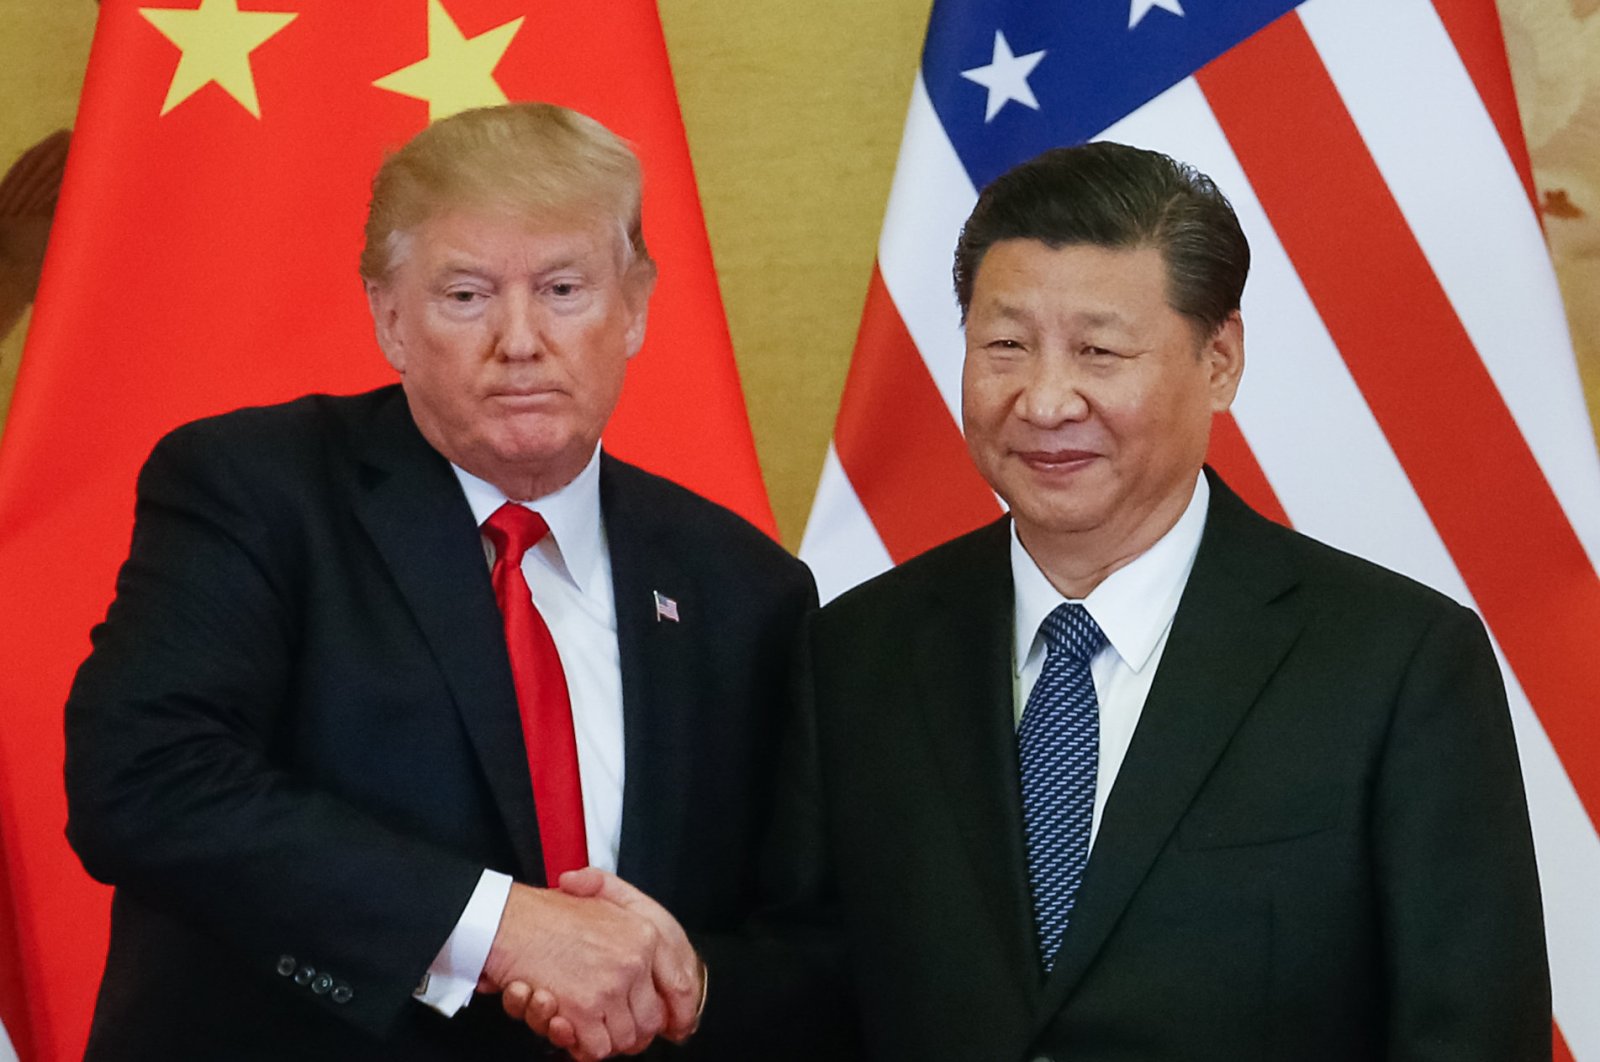 U.S. President Donald Trump (L) and Chinese President Xi Jinping (R) shake hands during a news conference at the Great Hall of the People (GHOP) in Beijing, China, Nov. 9, 2017. (EPA Photo)